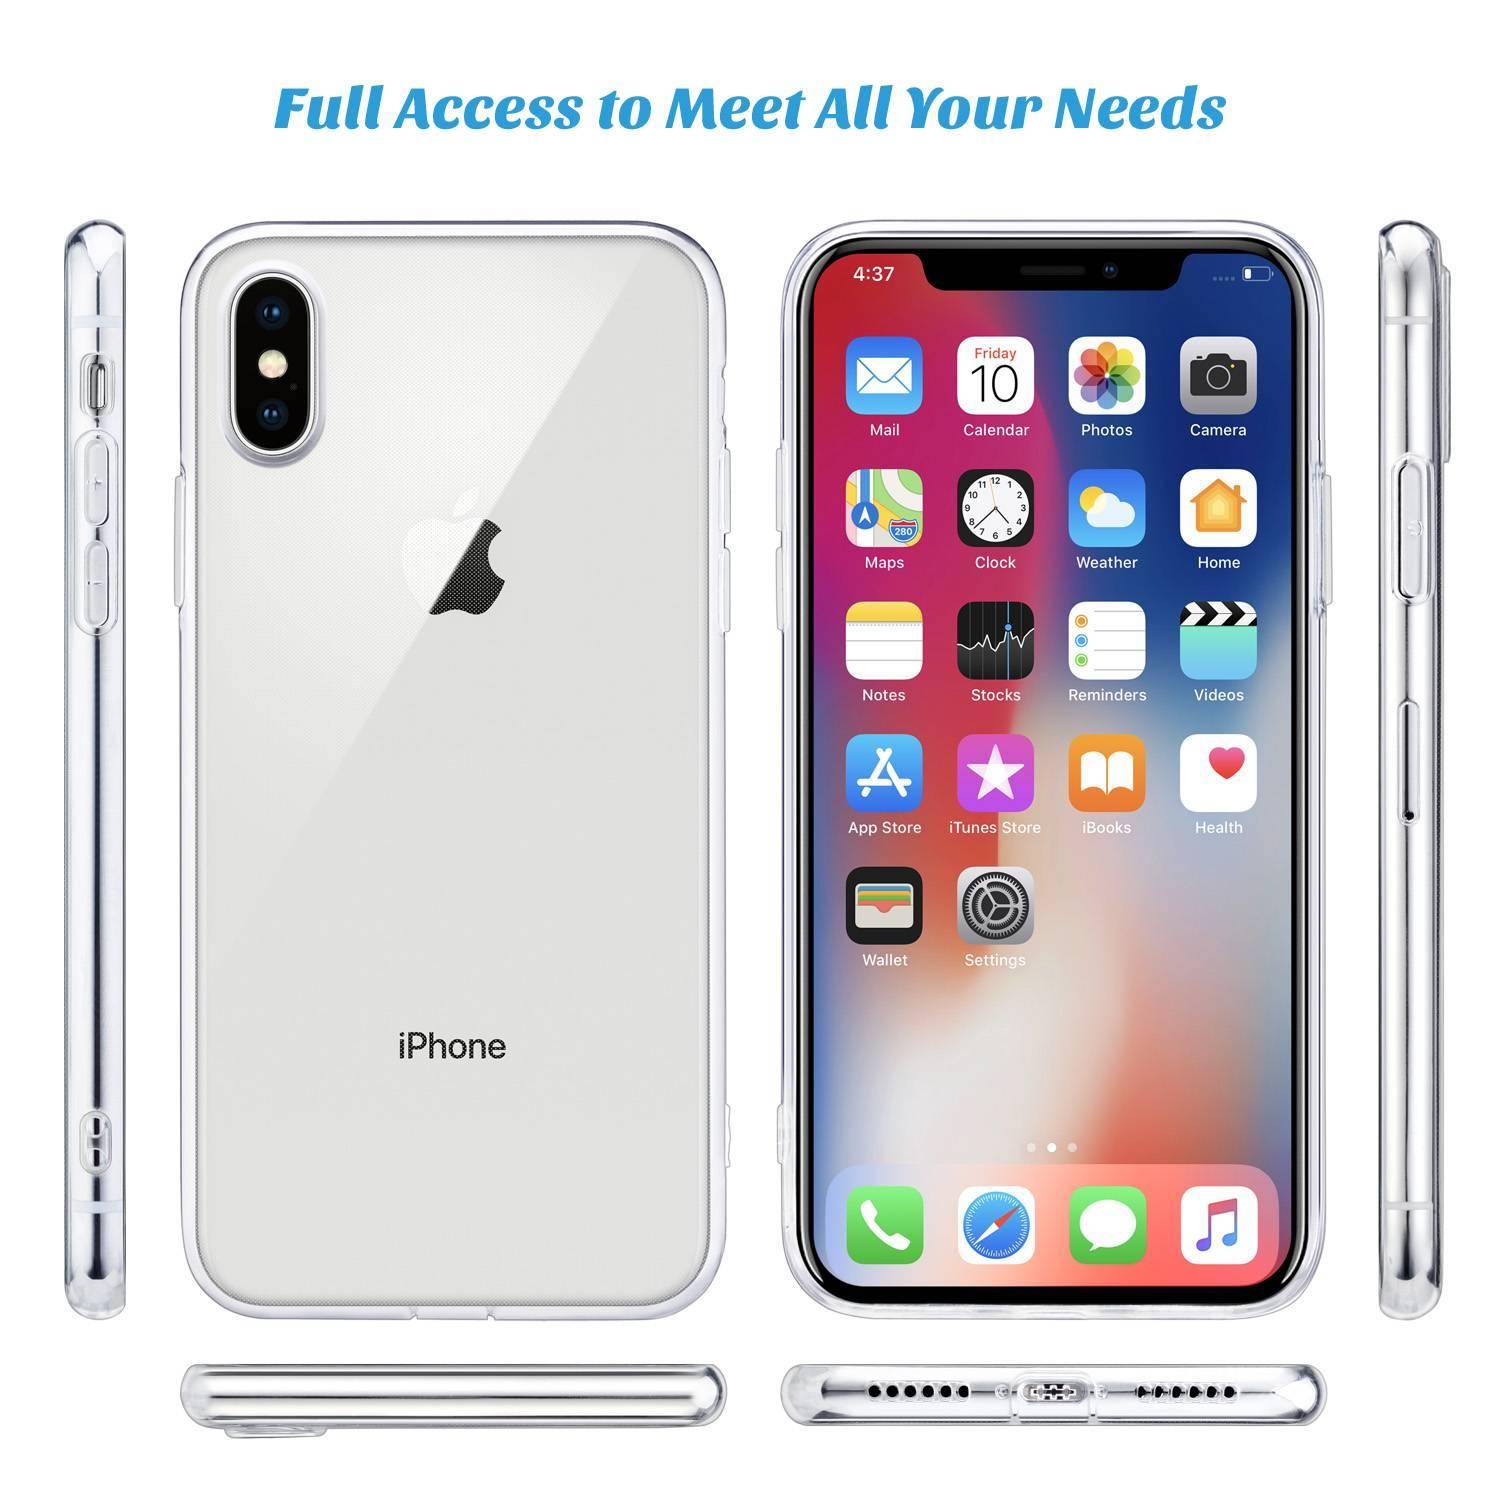 Transparent Phone Case for iPhone New Arrivals Phone Cases Smartphone Accessories iPhone cases, wireless speakers, activity trackers & cool gadgets